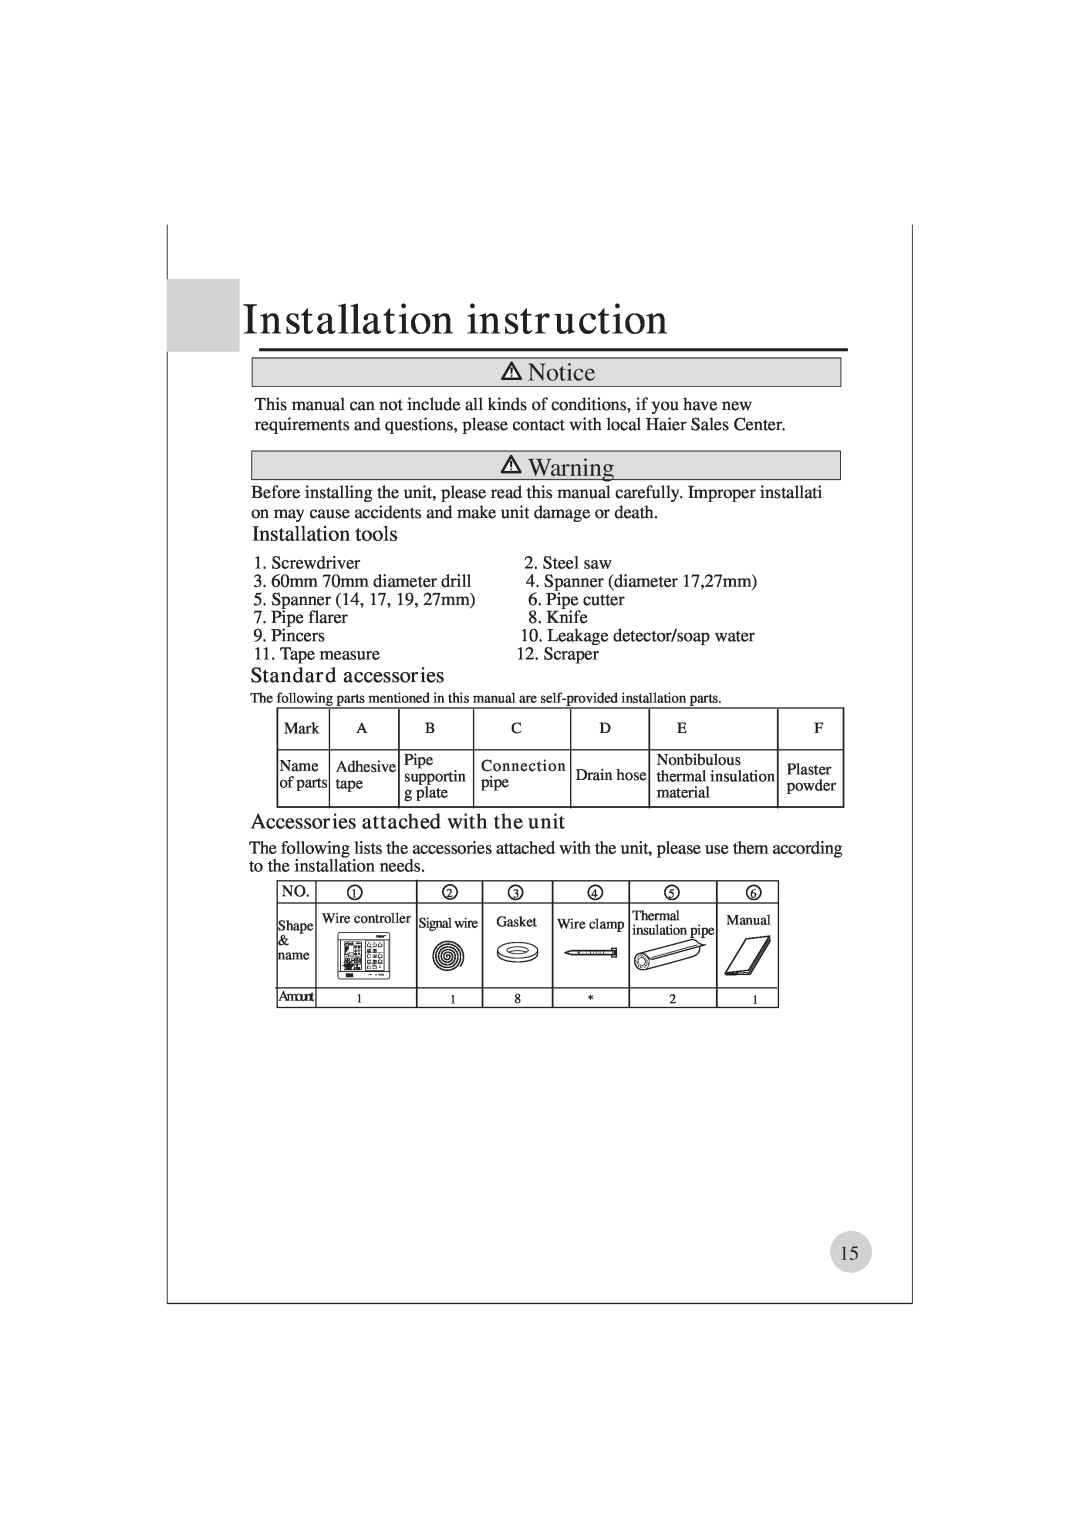 Haier AE122BCAAA (H2EM-18H03) manual Installation instruction, Installation tools, Standard accessories 